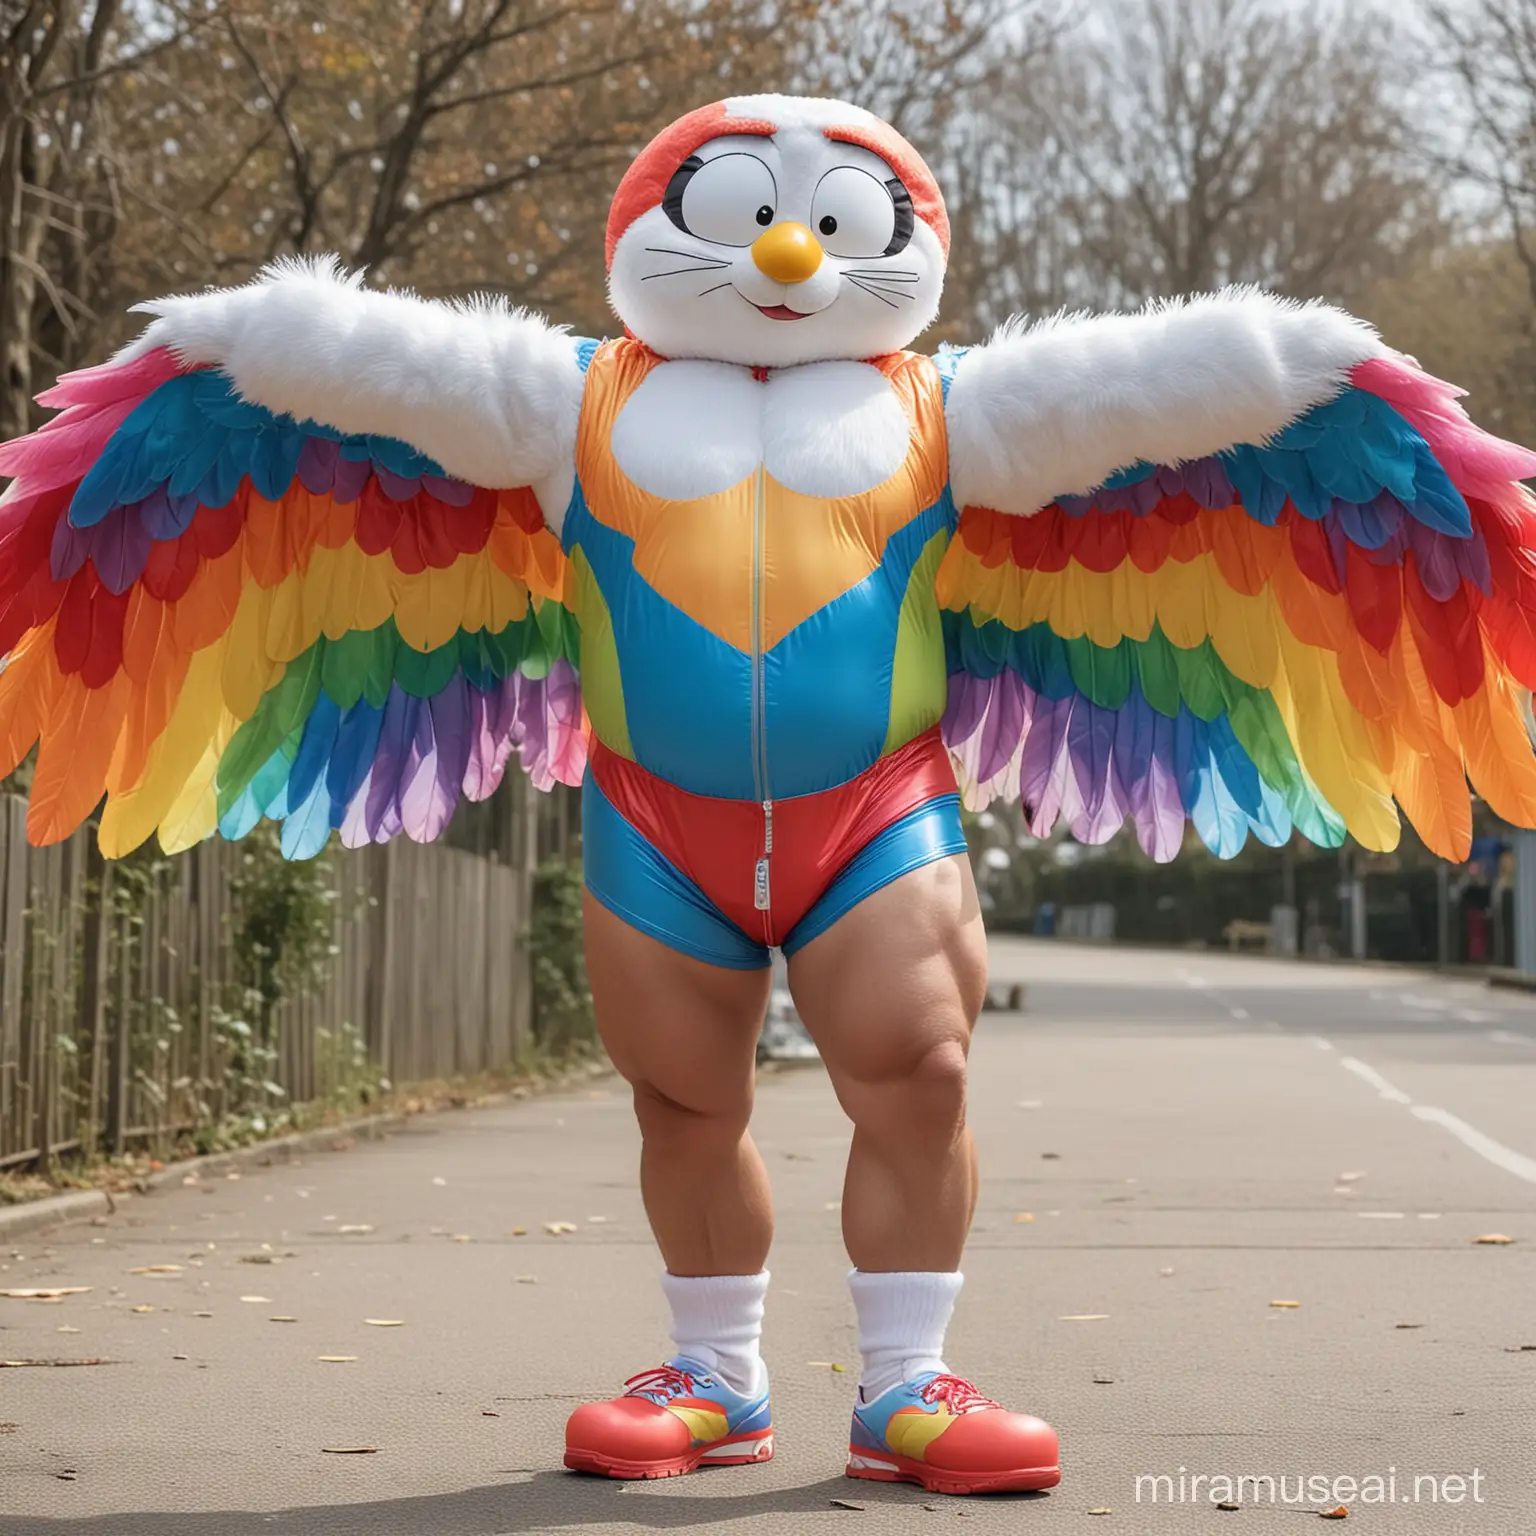 Muscular 40s Bodybuilder Flexing with RainbowColored Eagle Wings Jacket and Doraemon